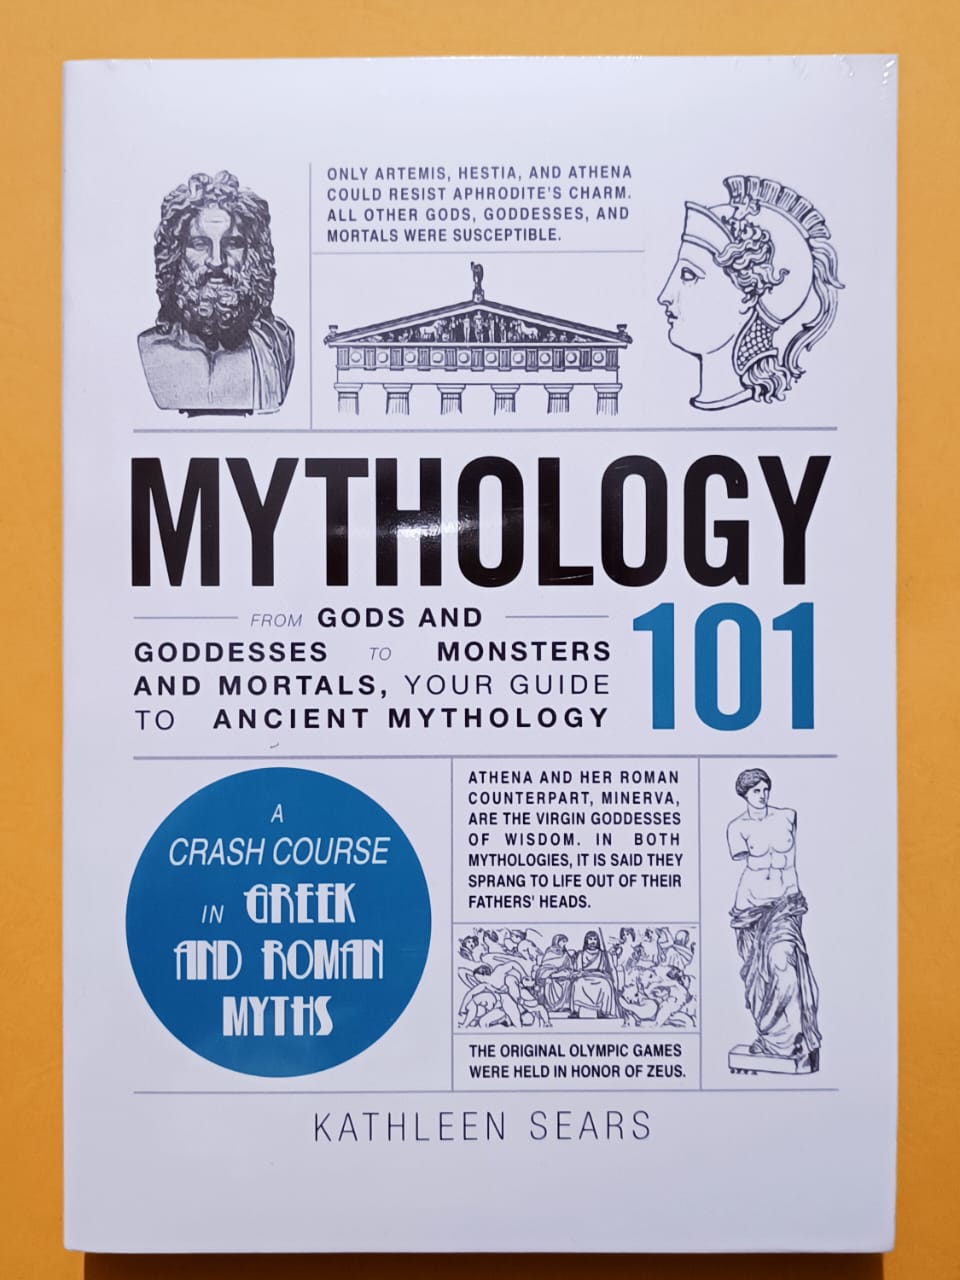 Mythology 101 From Gods and Goddesses to Monsters and Mortals, Your Guide to Ancient Mythology